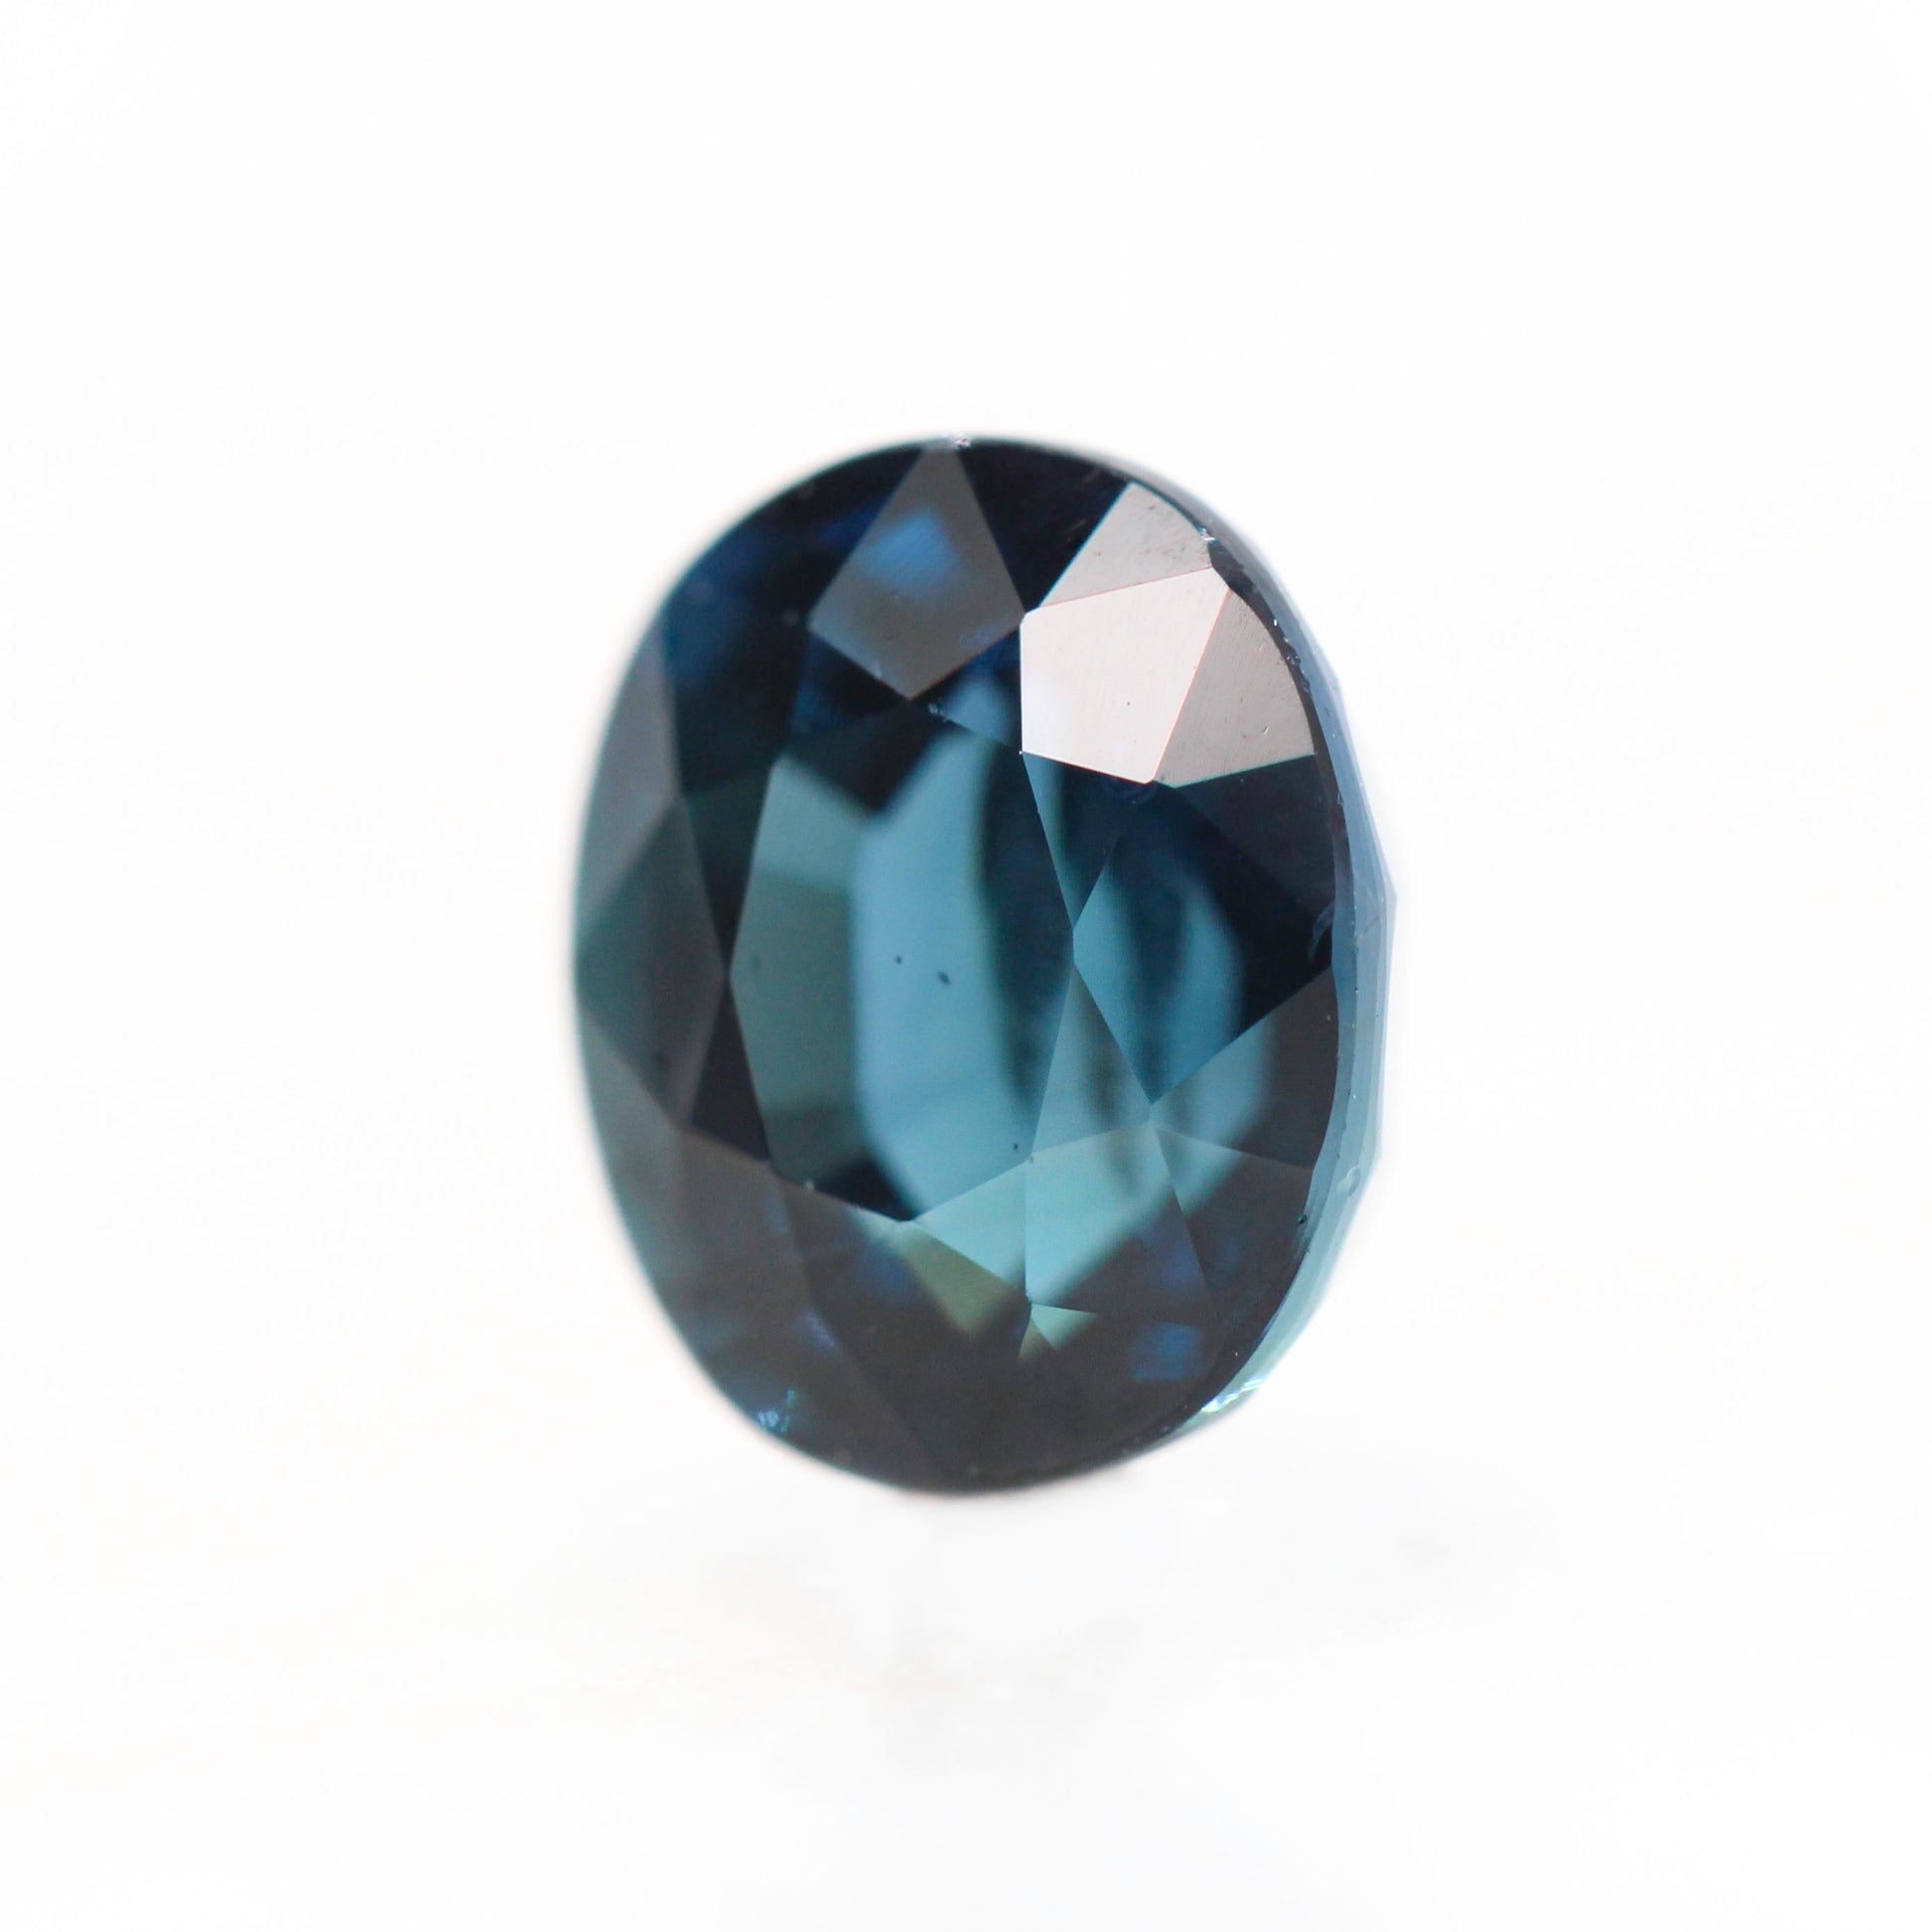 2.03 Carat Teal Blue Oval Sapphire for Custom Work - Inventory Code TBOS203 - Midwinter Co. Alternative Bridal Rings and Modern Fine Jewelry